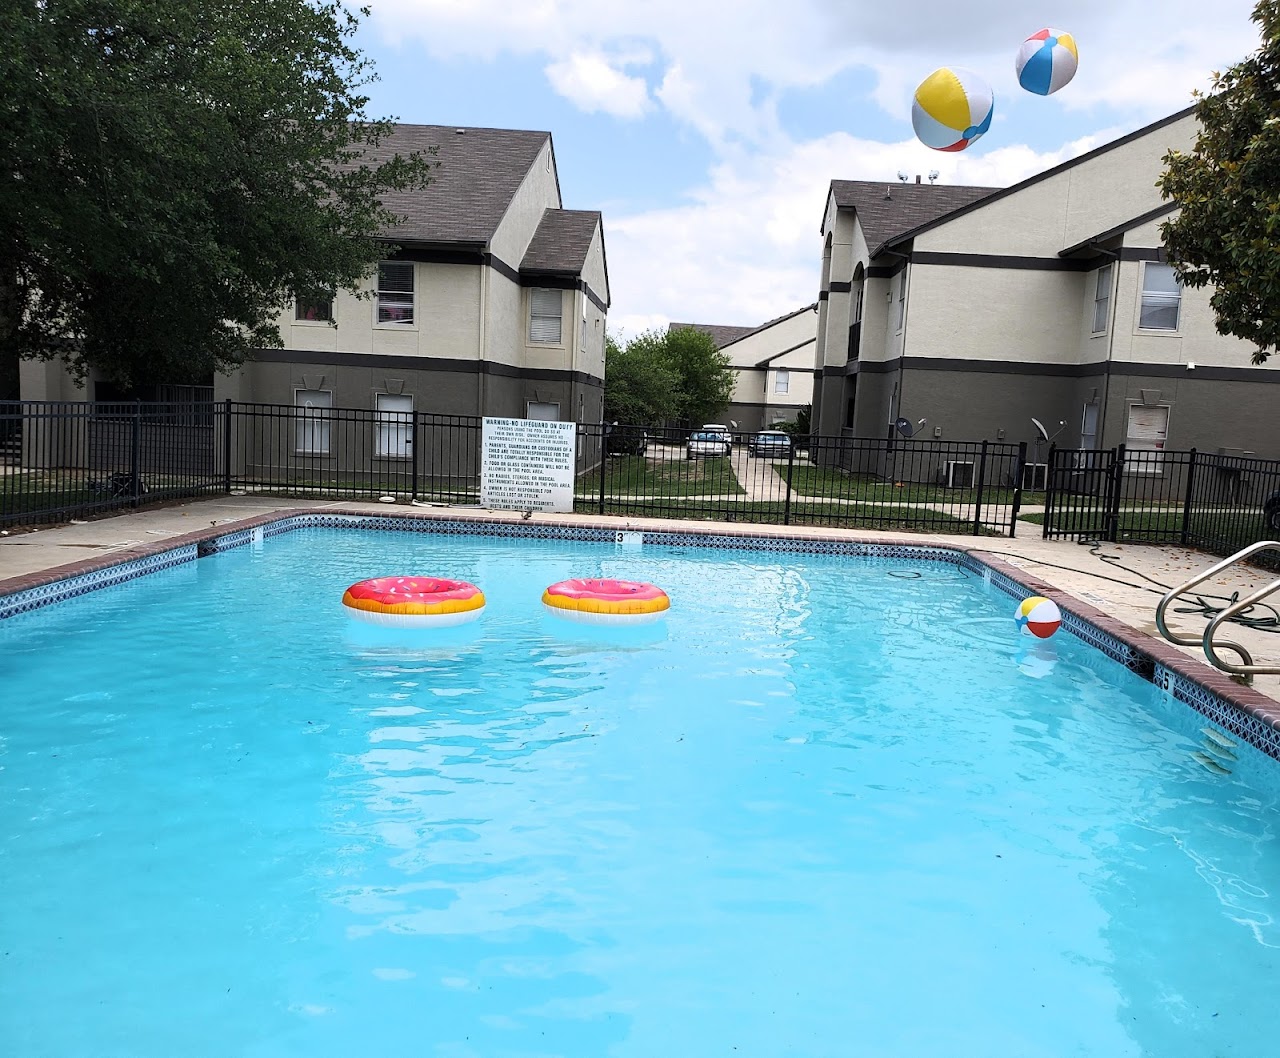 Photo of GRANADA APTS. Affordable housing located at 834 S GETTY ST UVALDE, TX 78801